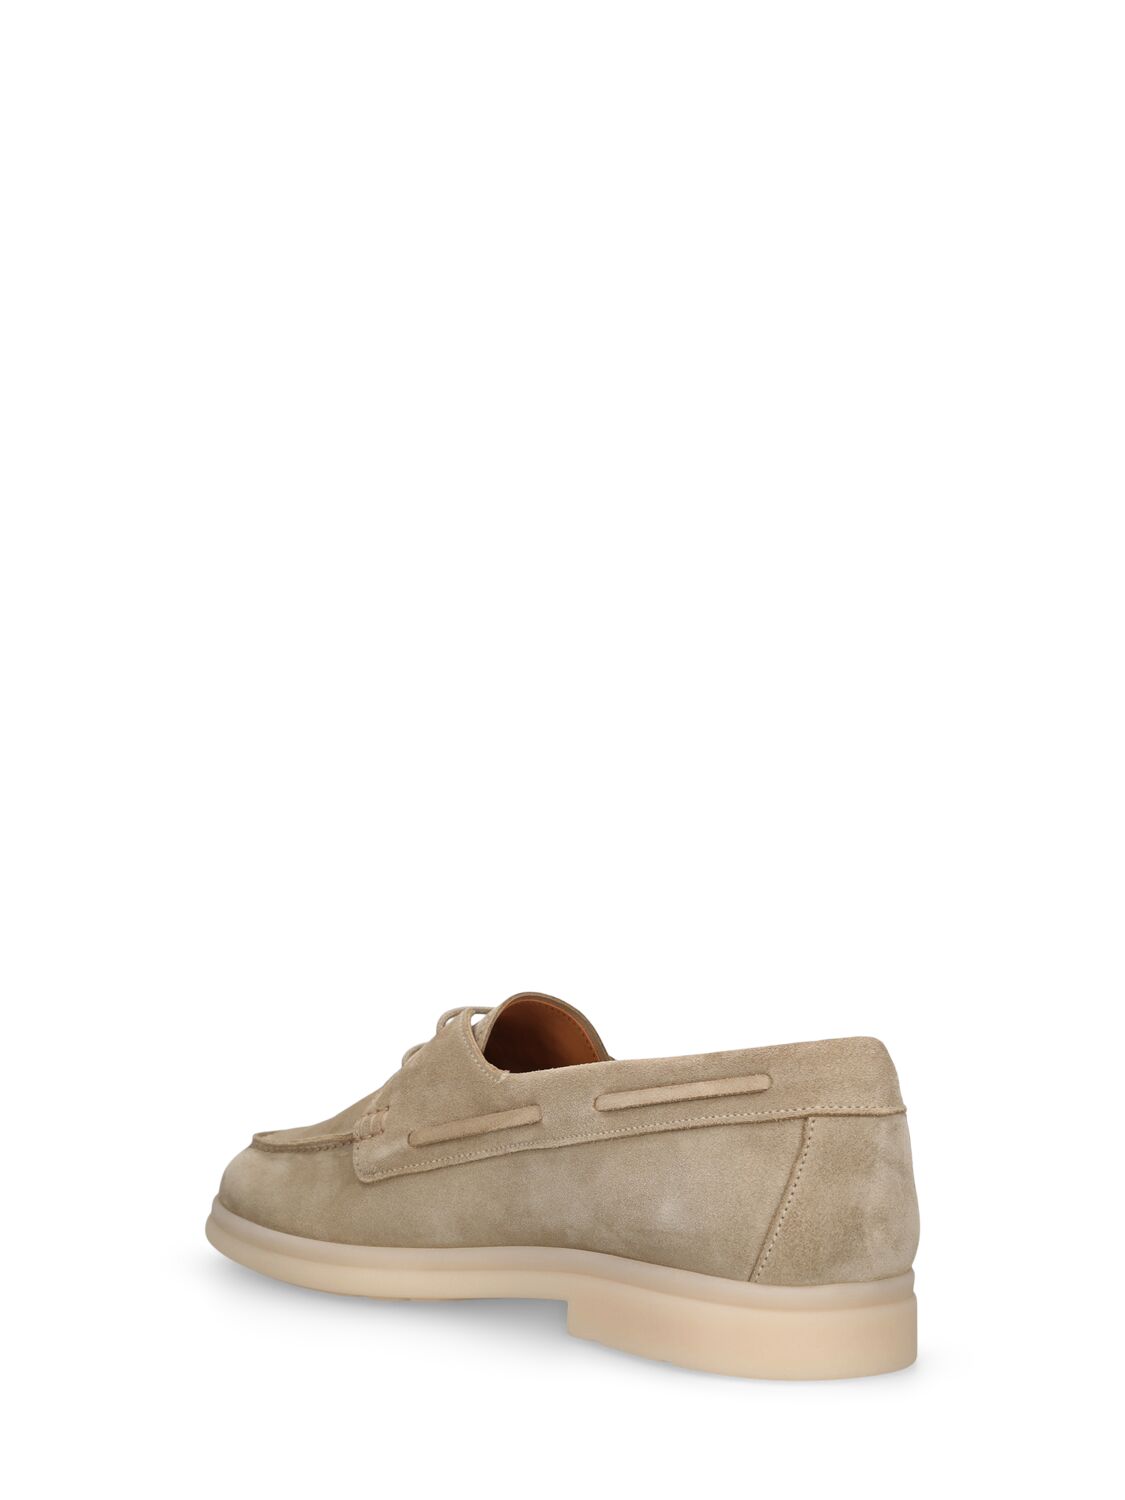 Shop Church's Morley Suede Lace-up Boat Shoes In Desert